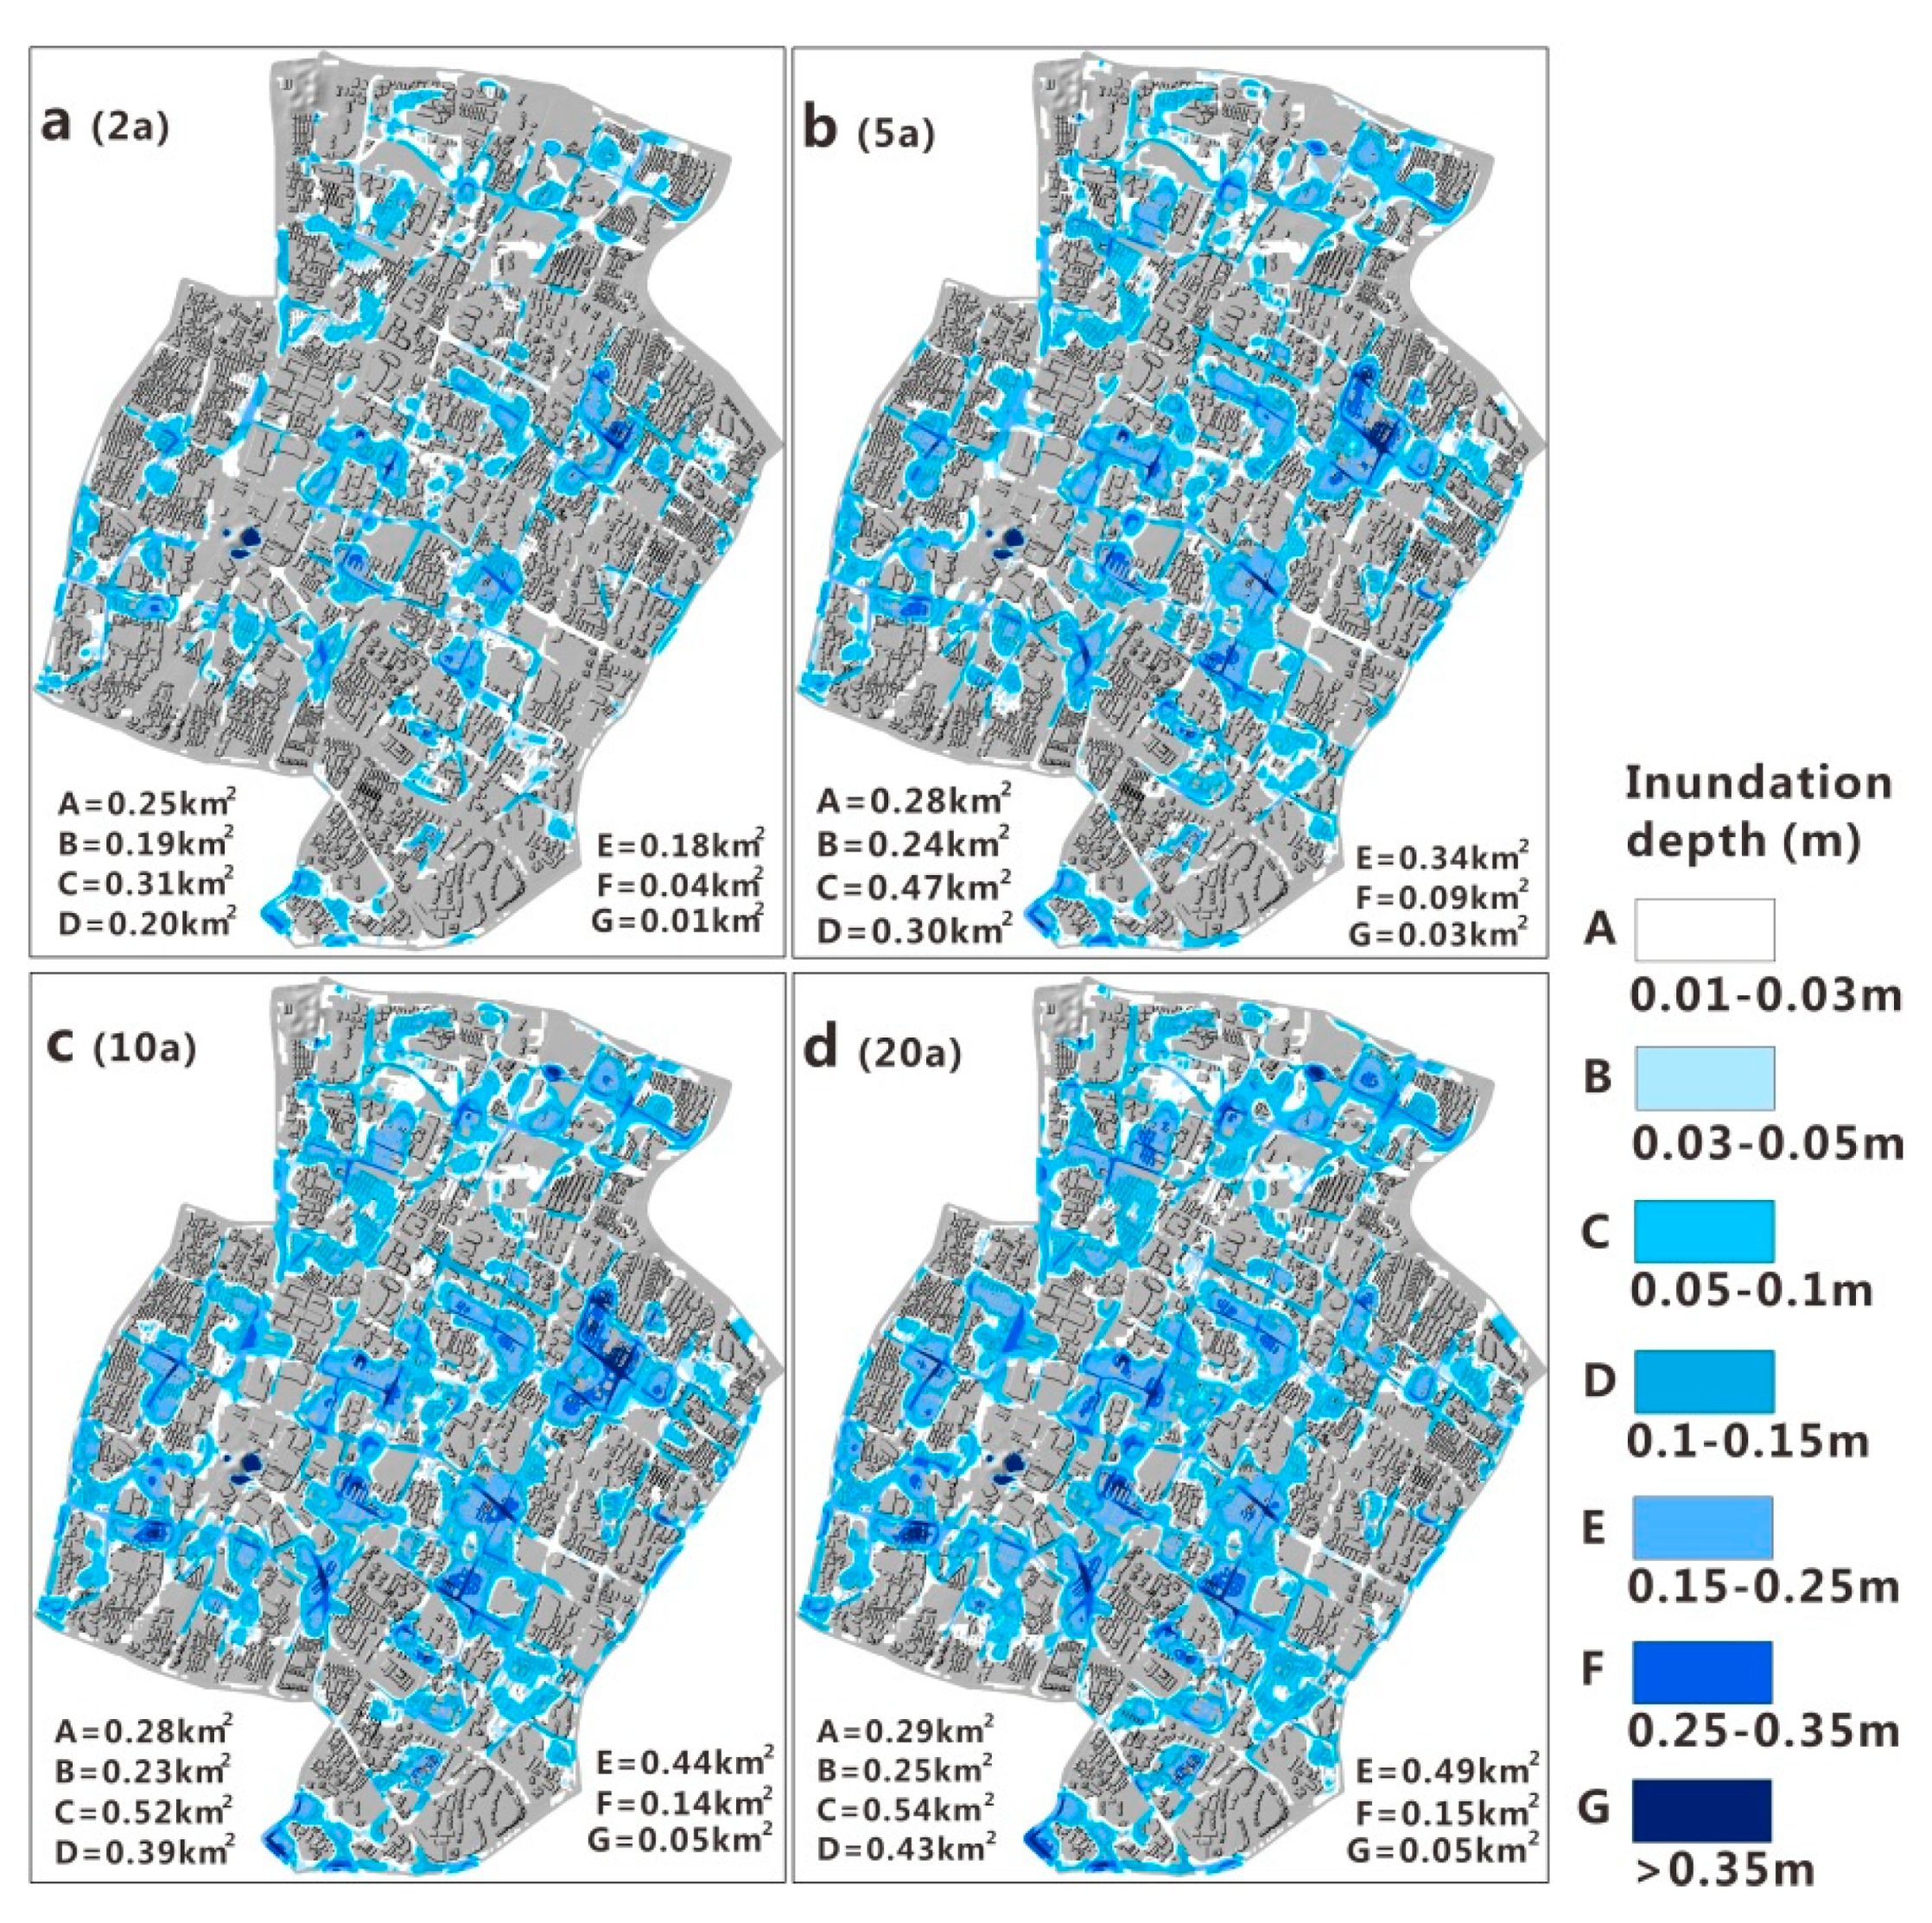 Sustainability Free Full Text A Simple Gis Based Model For Urban Rainstorm Inundation Simulation Html